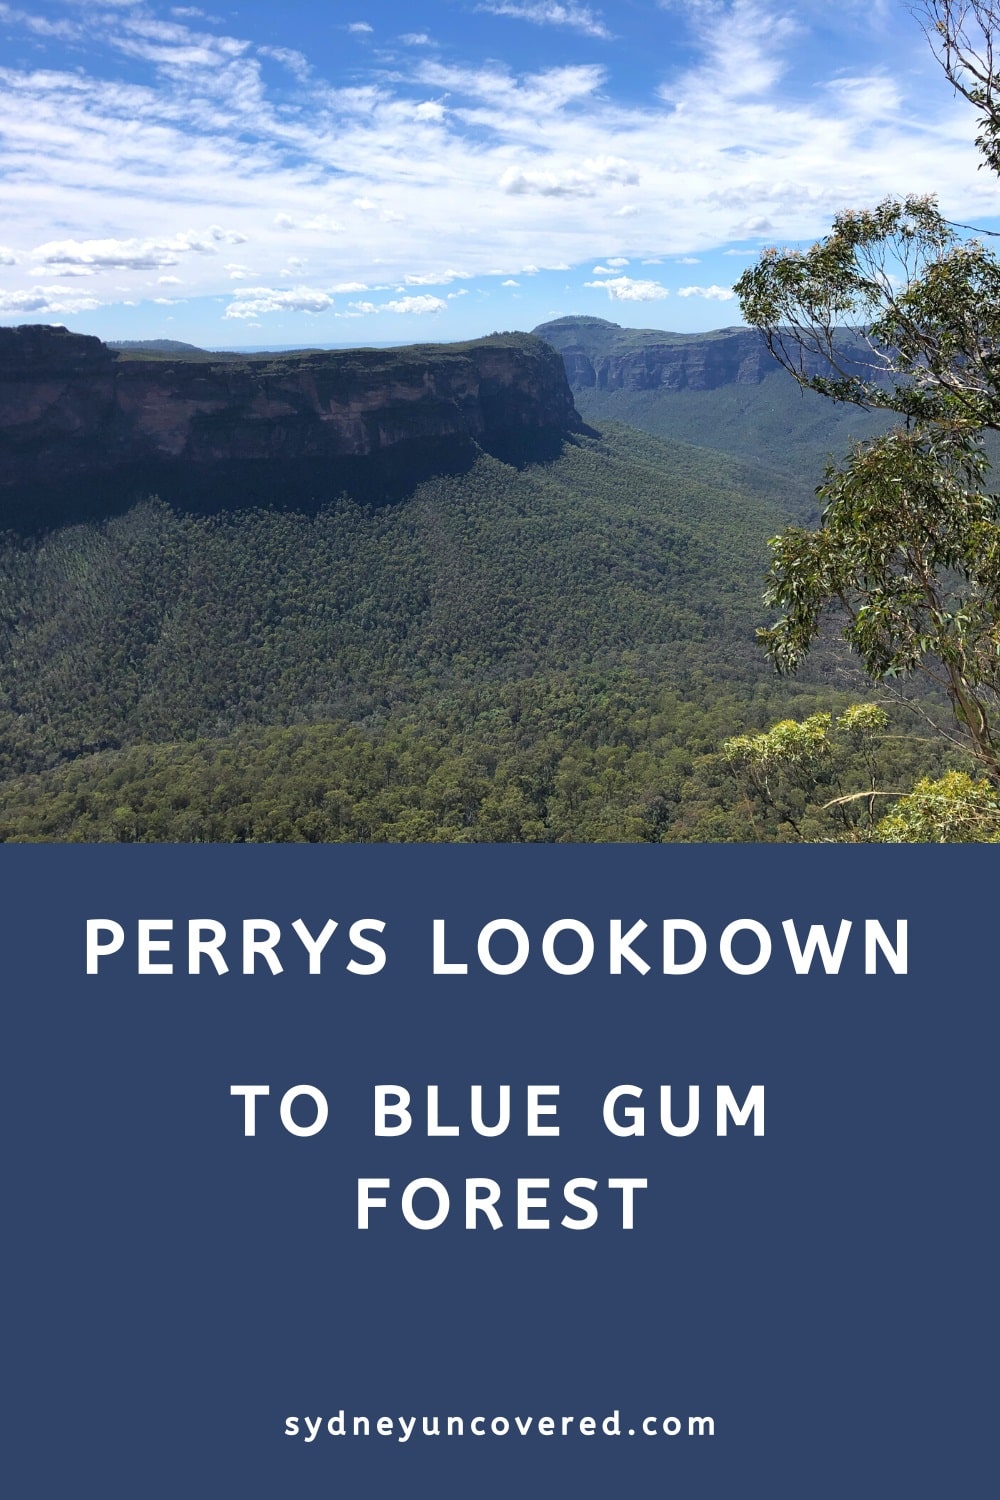 Perrys Lookdown to Blue Gum Forest